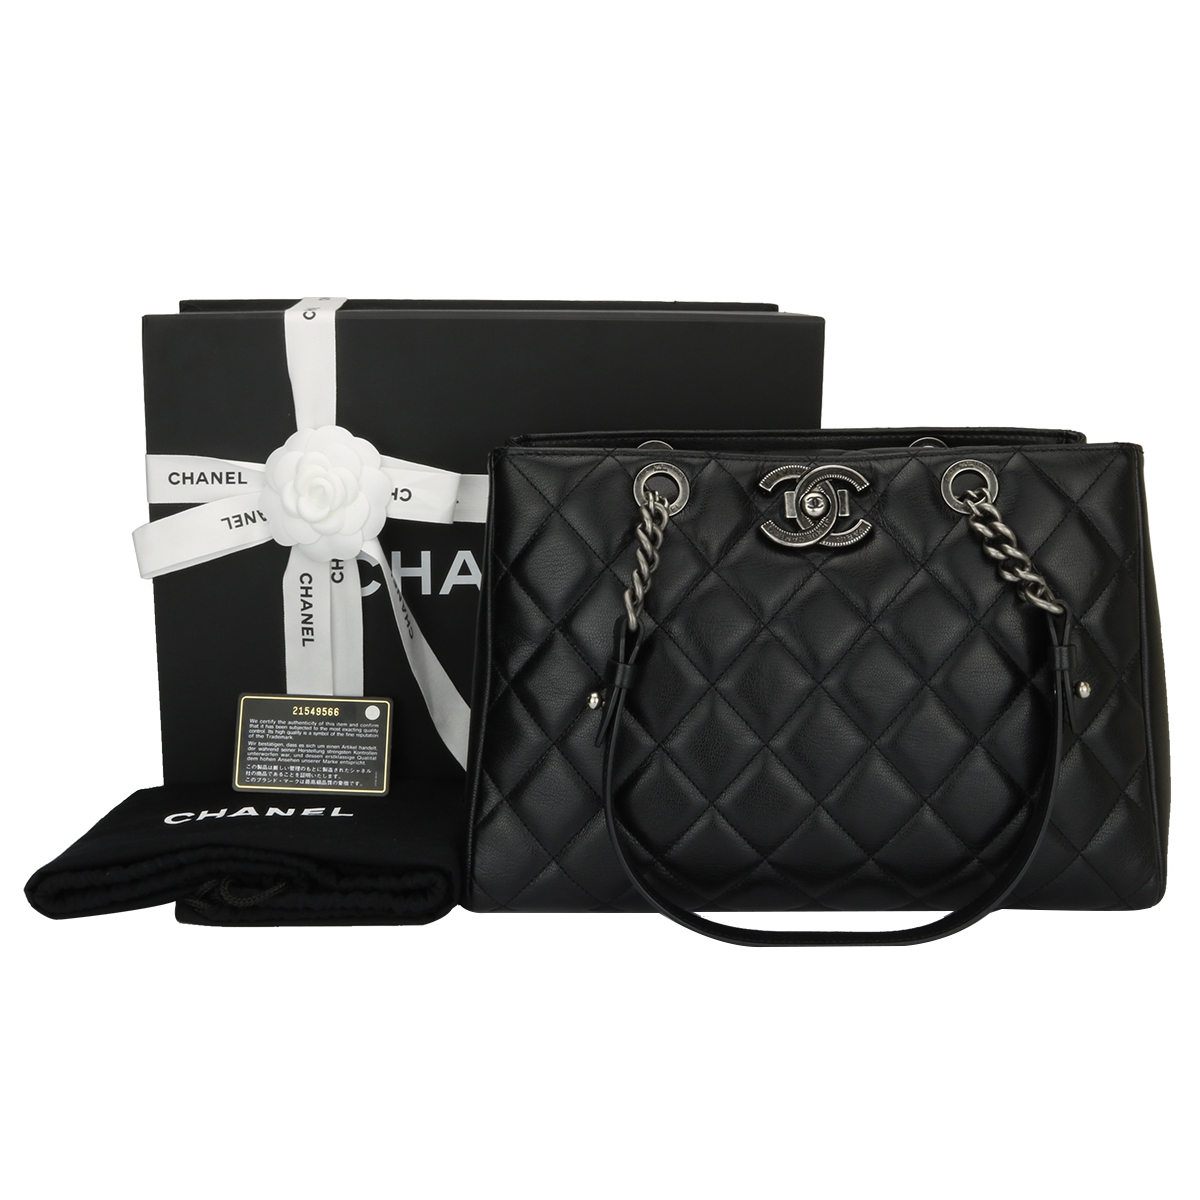 Chanel Metallic Goatskin Quilted Medium Rock in Rome Tote Charcoal